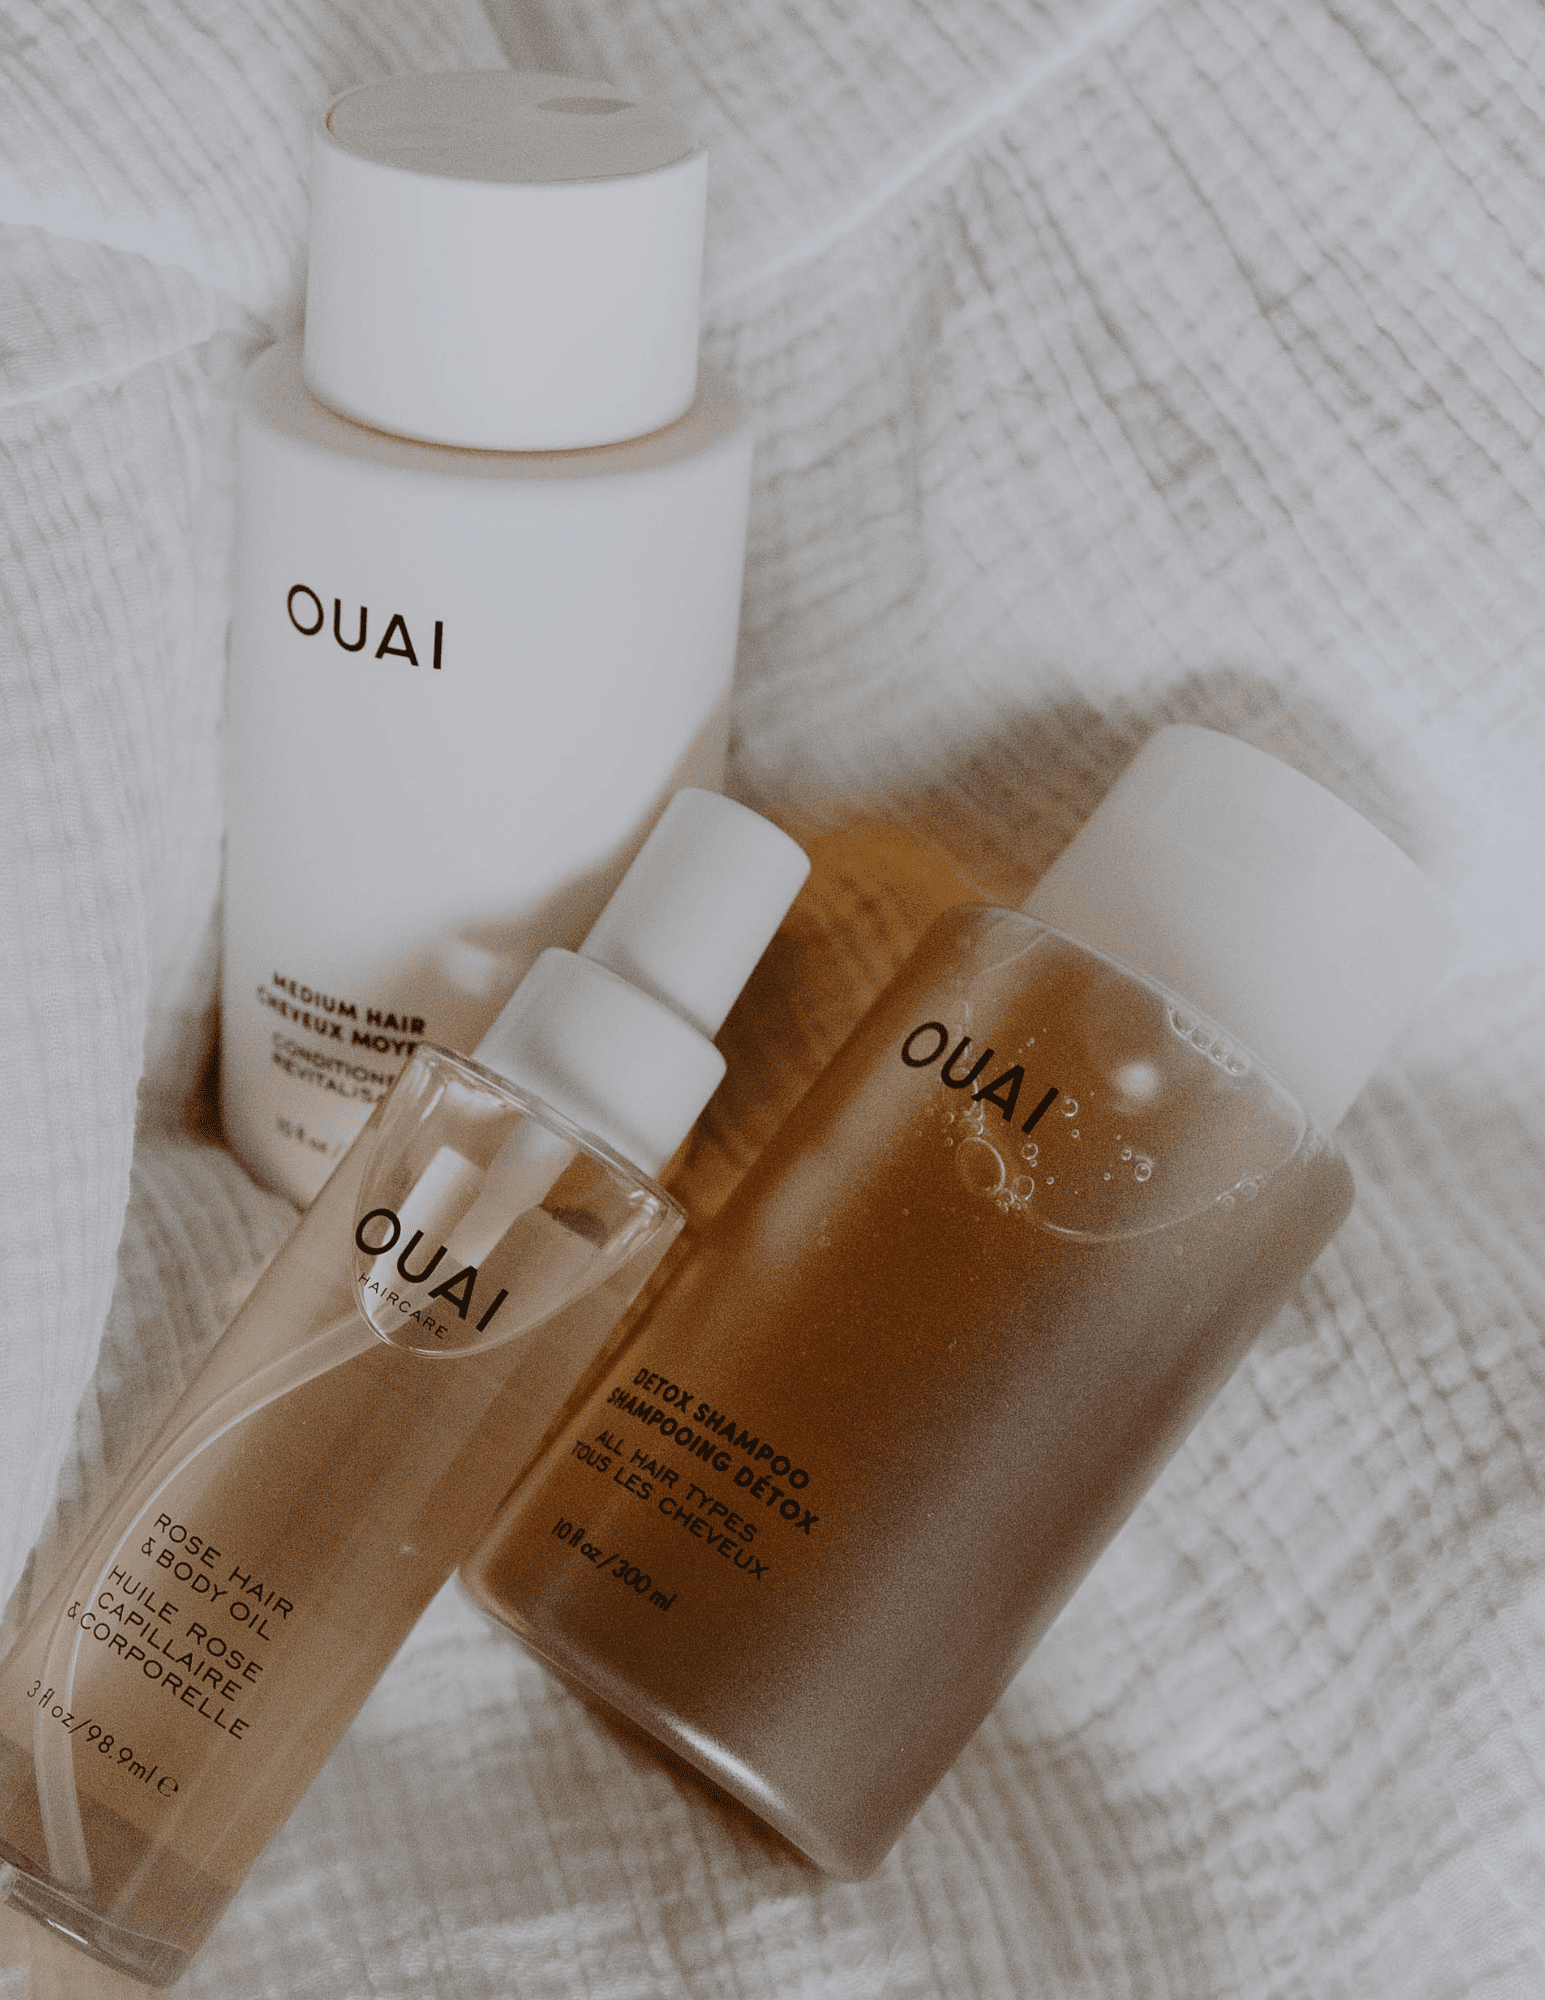 haircare products l for the a Winter self-care routines and practices blog post